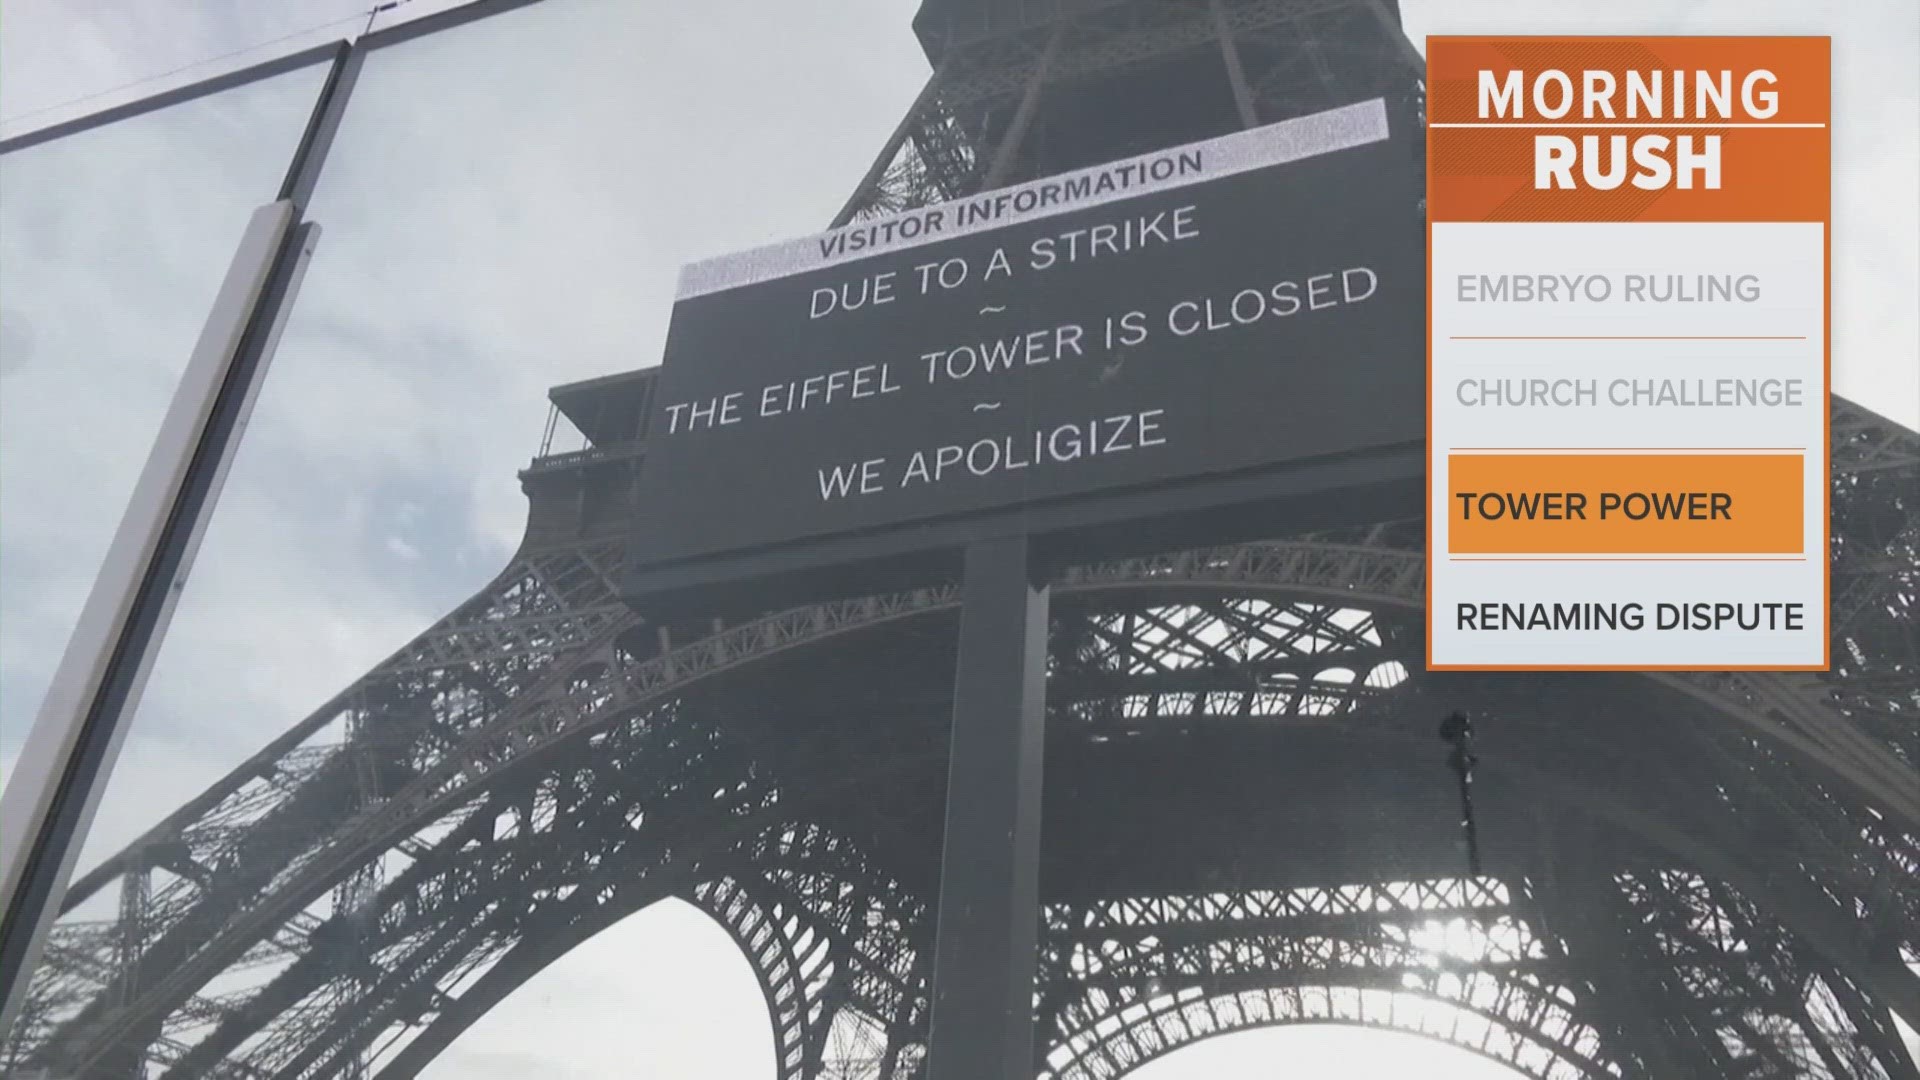 The Eiffel Tower is typically open 365 days a year, but a number of strikes in recent months have disrupted daily operations.